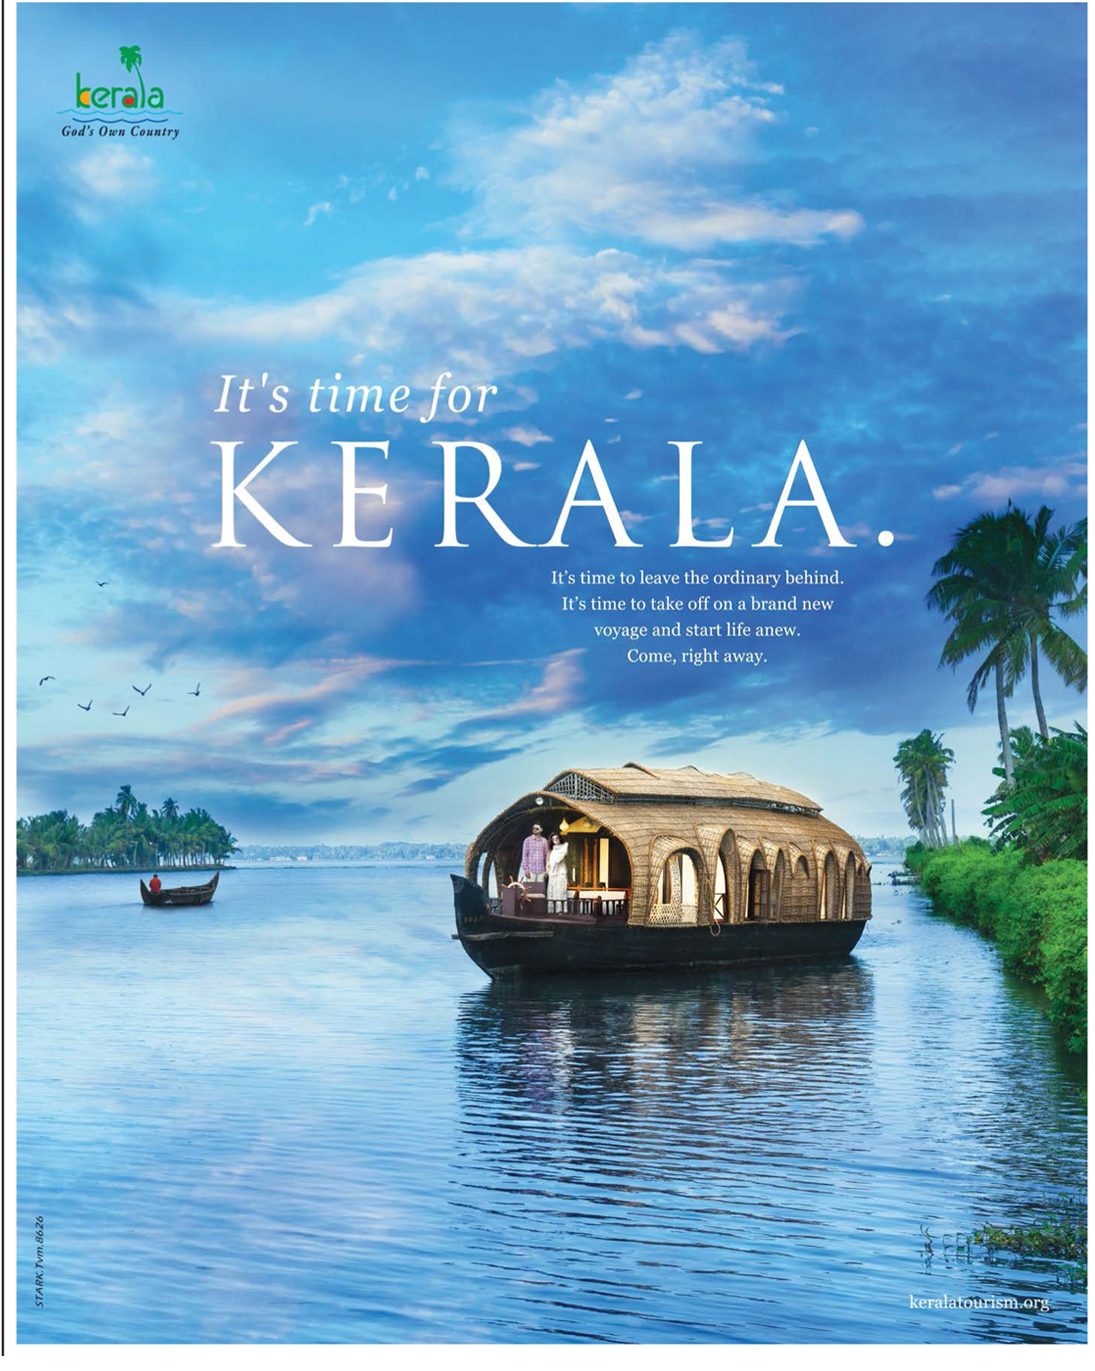 ad agency for kerala tourism